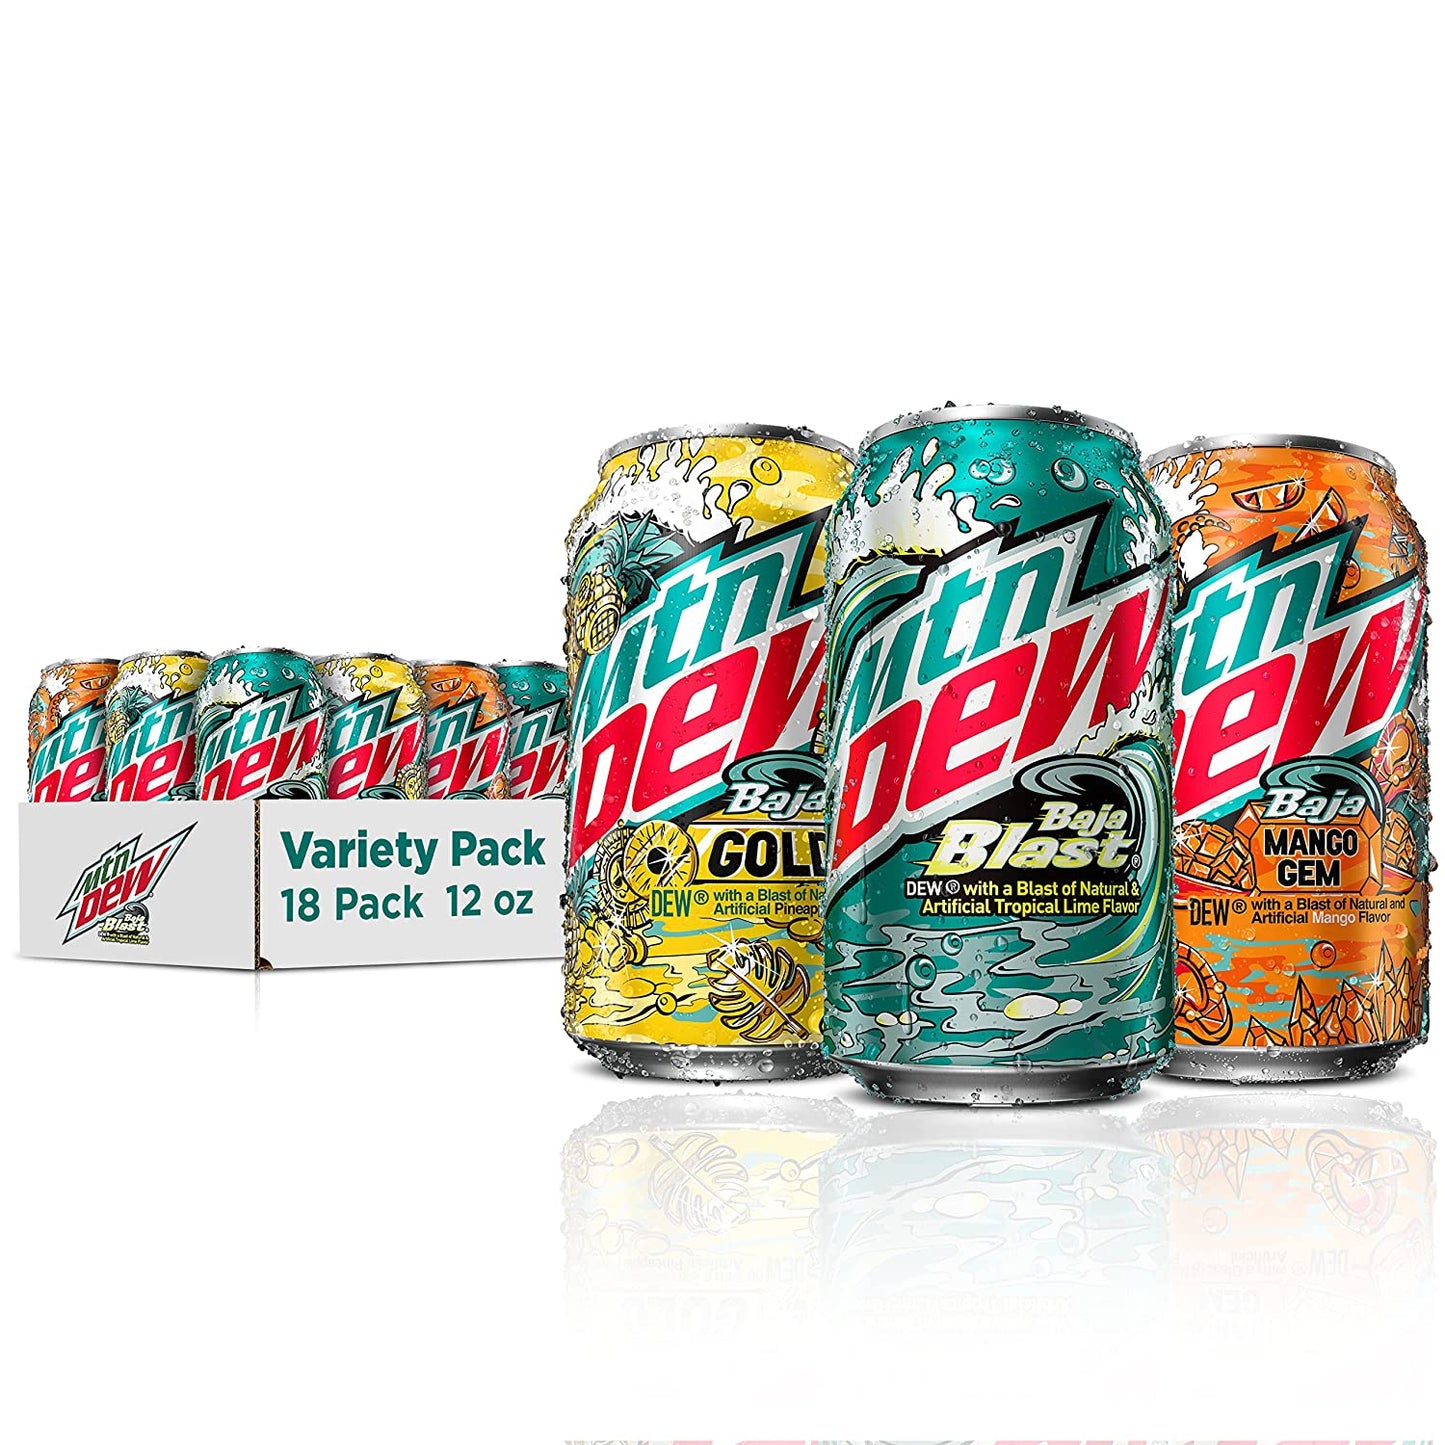 Mountain Dew Baja Tropics 3 Flavor Variety Pack, 12oz Cans (18 Pack), Limited Edition - OOS